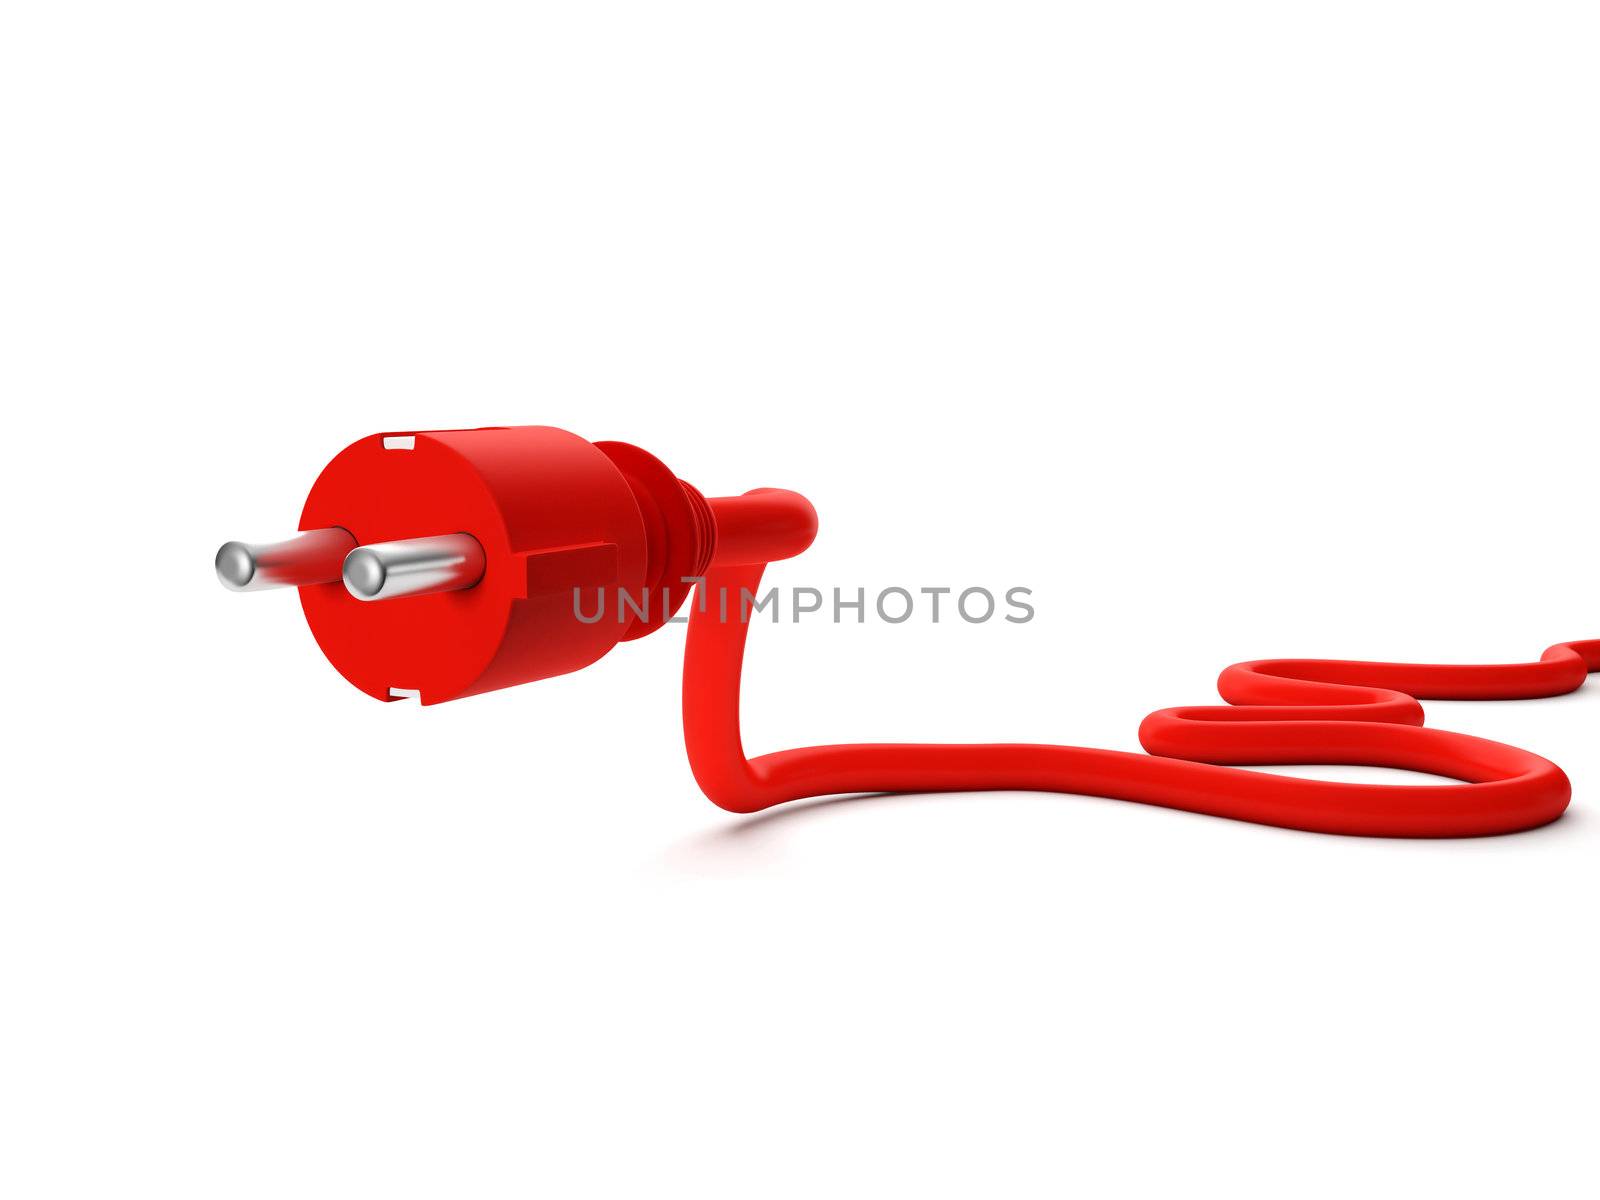 3d illustration: Red power outlet on a white background by kolobsek